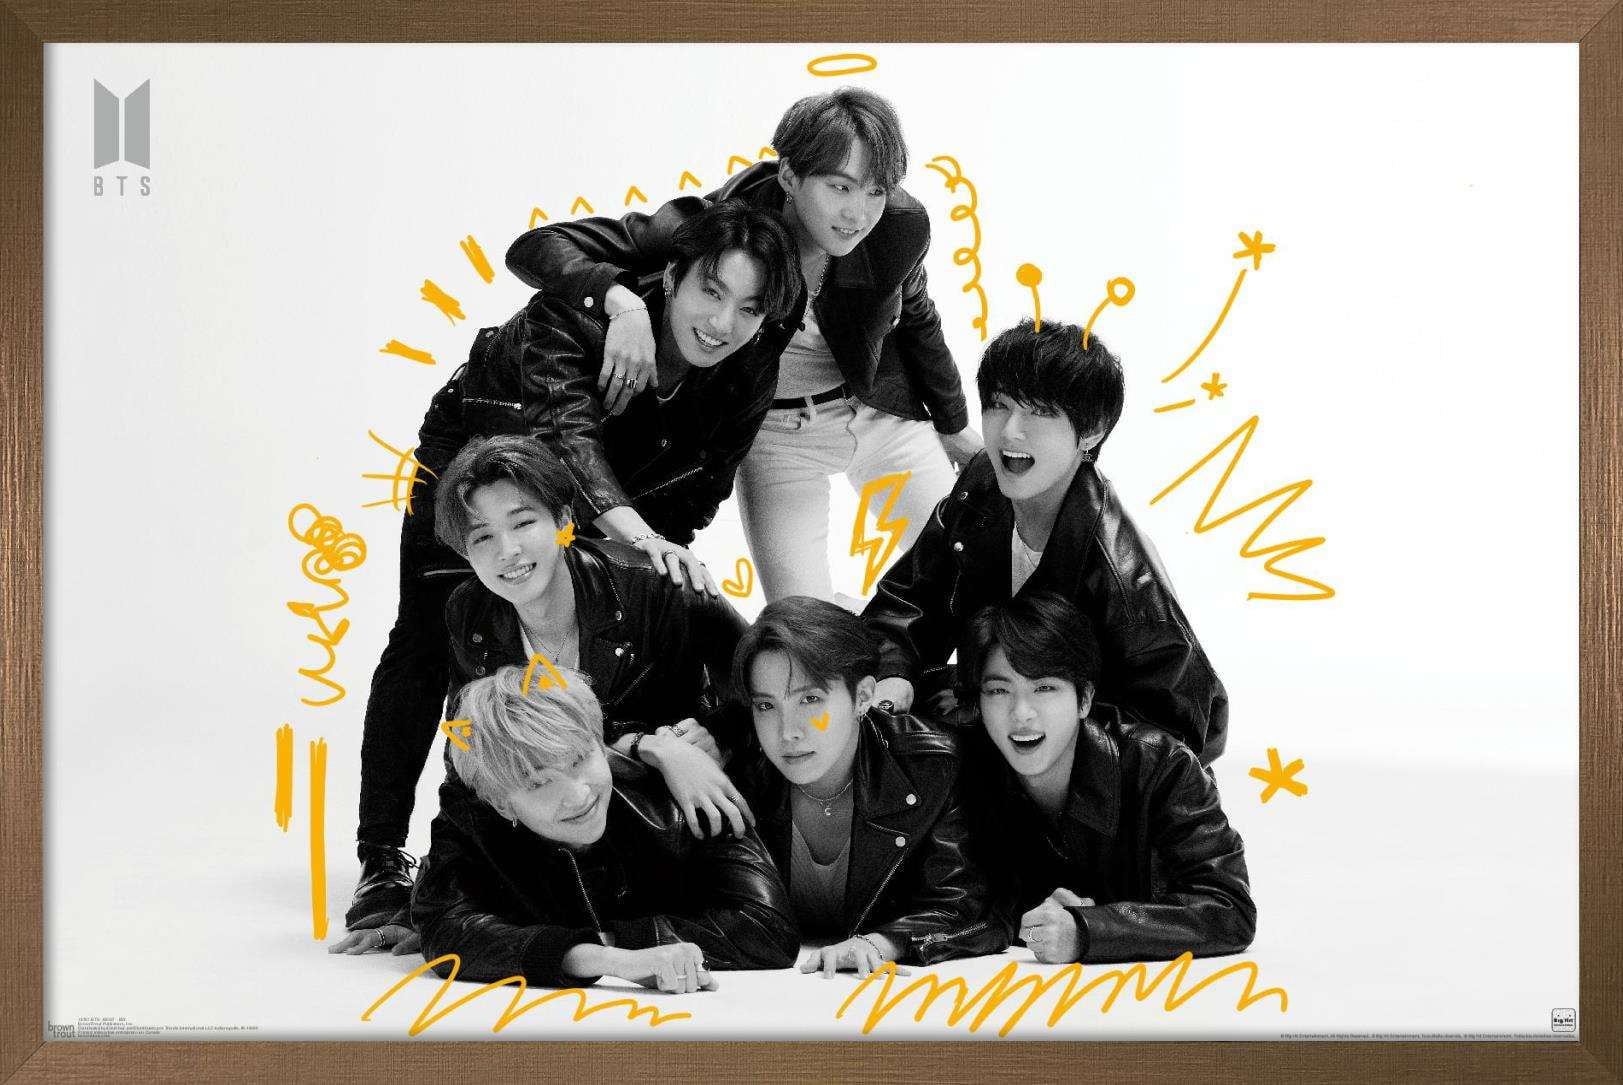 BTS - MOS7 - BW Wall Poster, 22.375 x 34